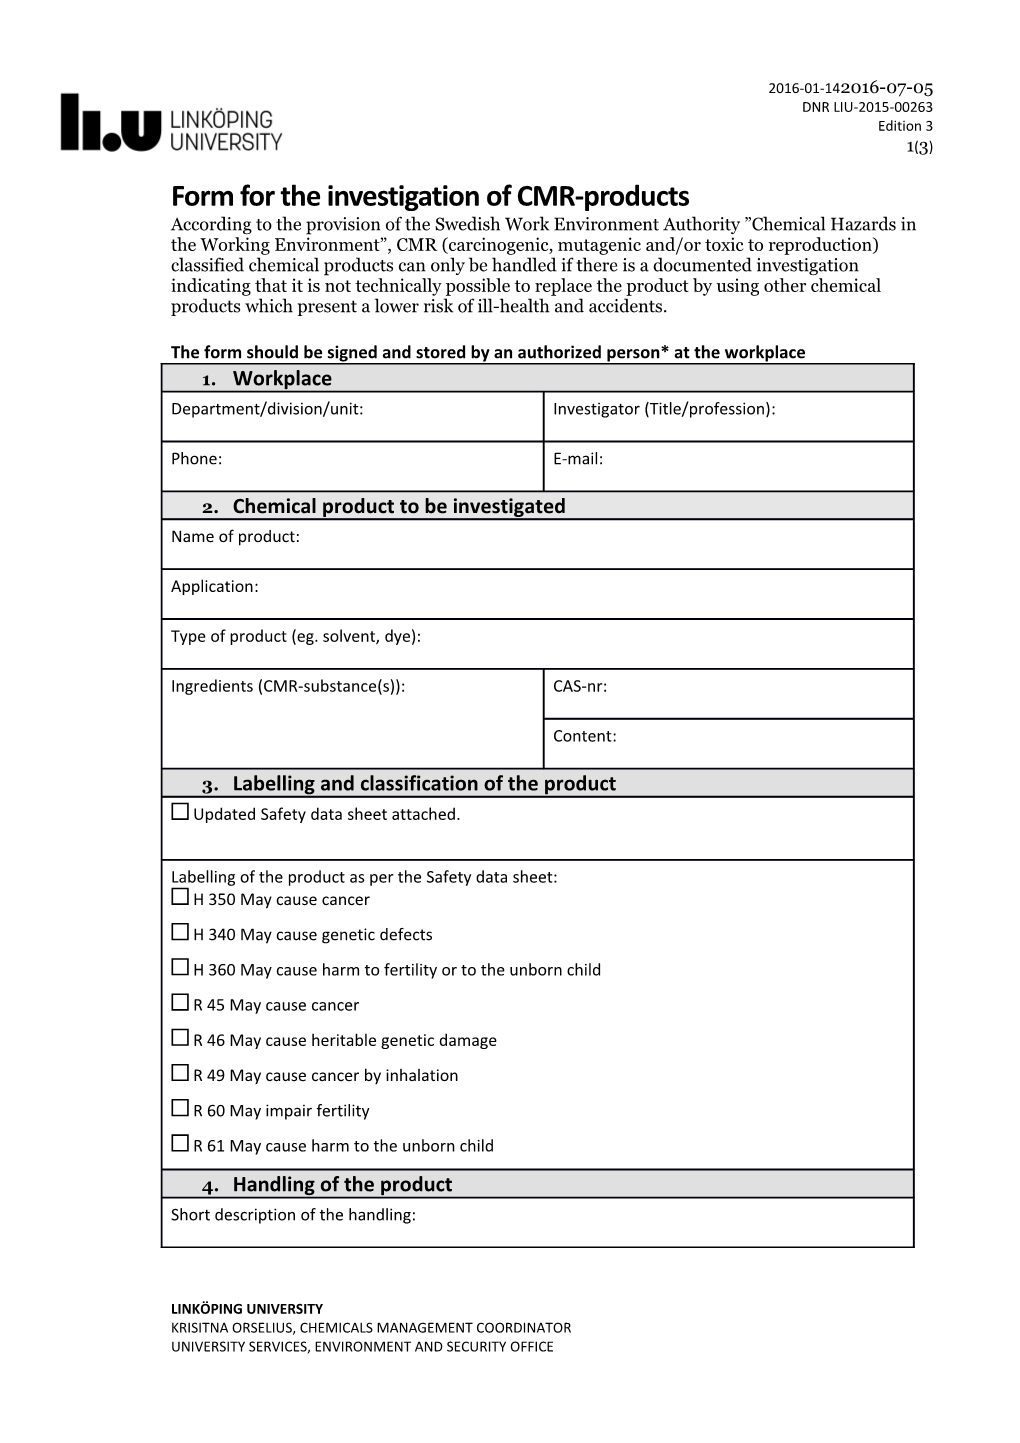 Form for the Investigation of CMR-Products